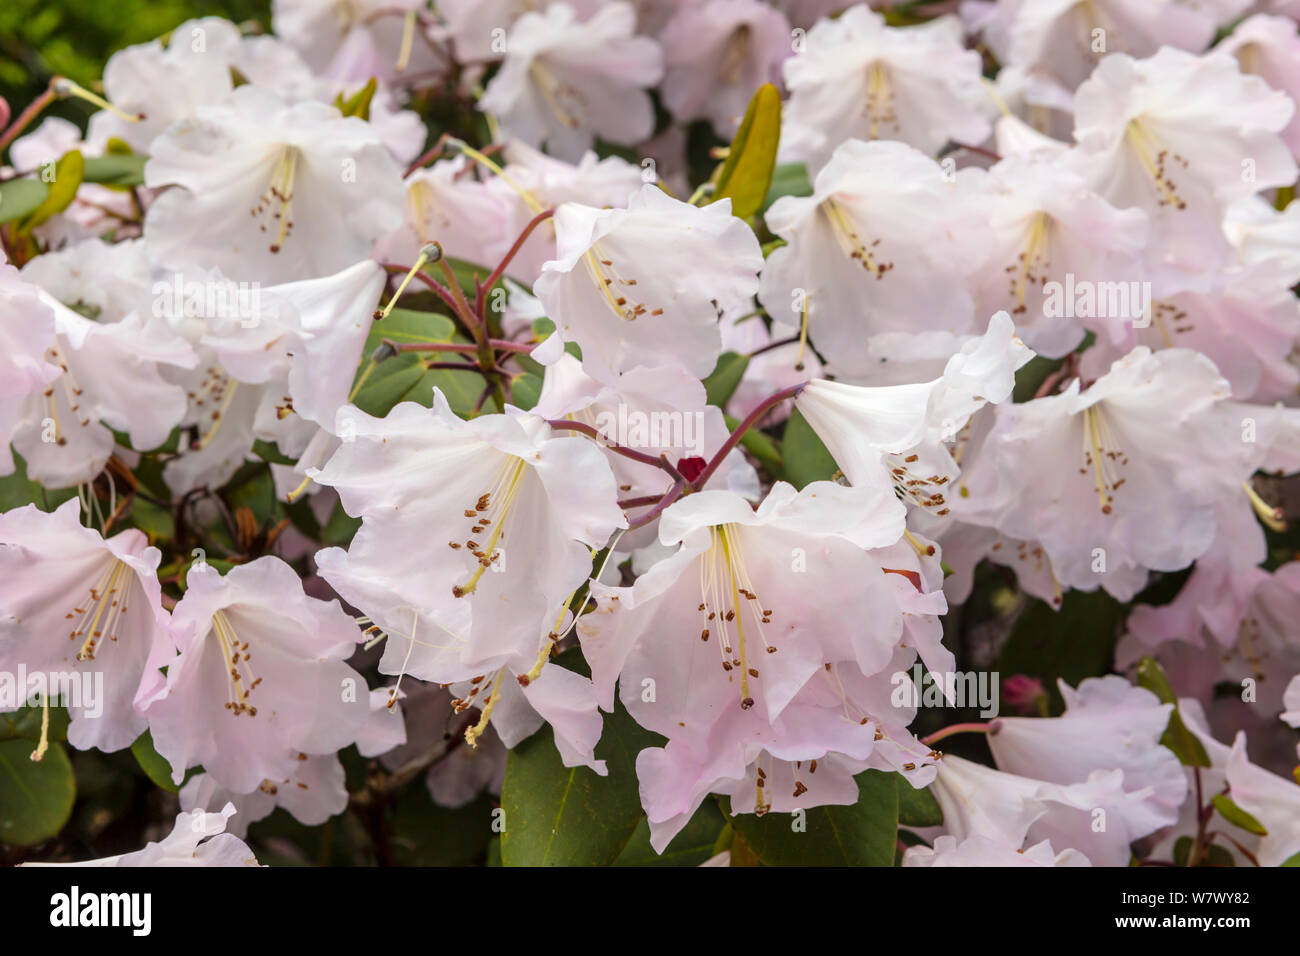 Pale pink bell shaped flowers of compact rhododendron shrub in a garden in springtime. Stock Photo